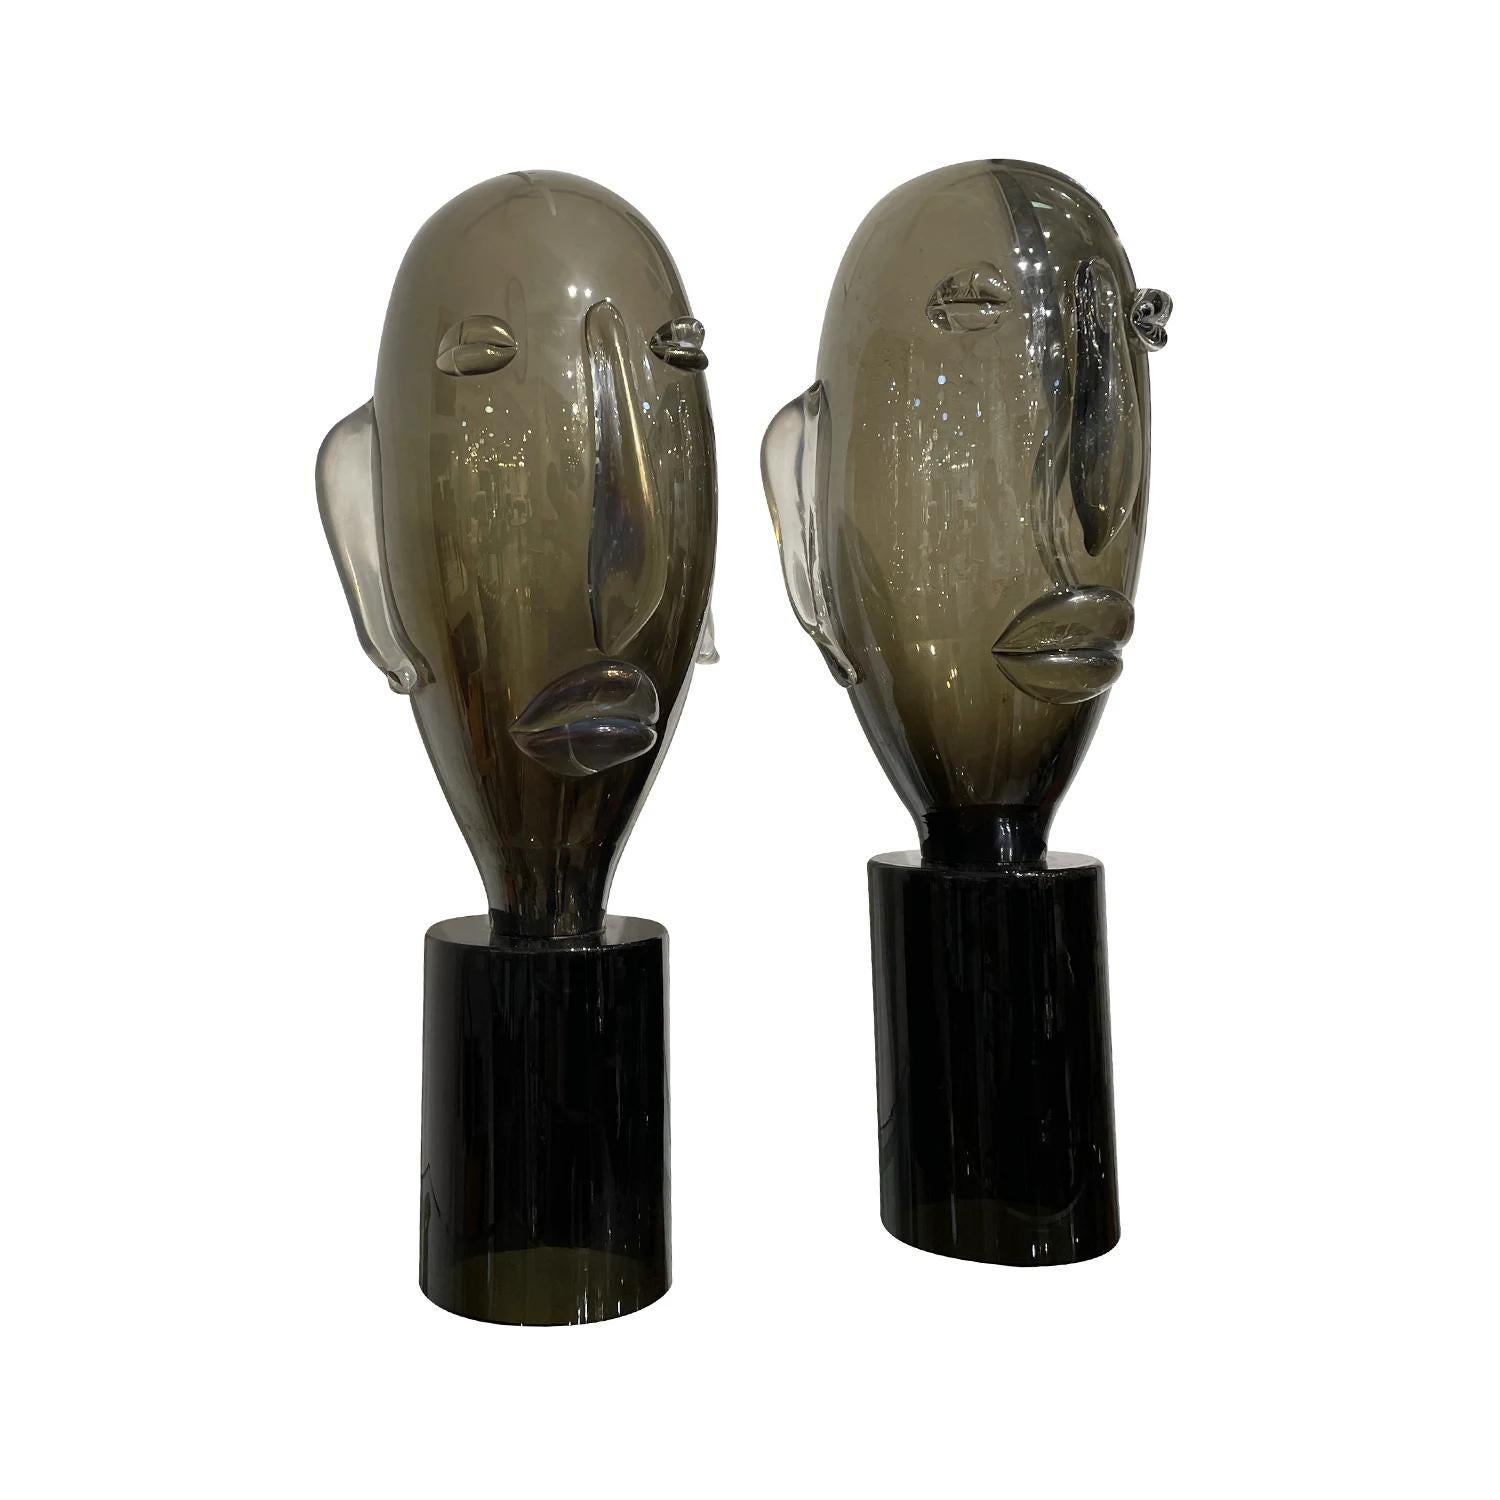 A late vintage Mid-Century Modern Italian similar pair of sculpture heads made of hand blown smoked Murano glass in the style of Picasso, in good condition. The detailed décor pieces are particularized with clear, white spots resting on a round